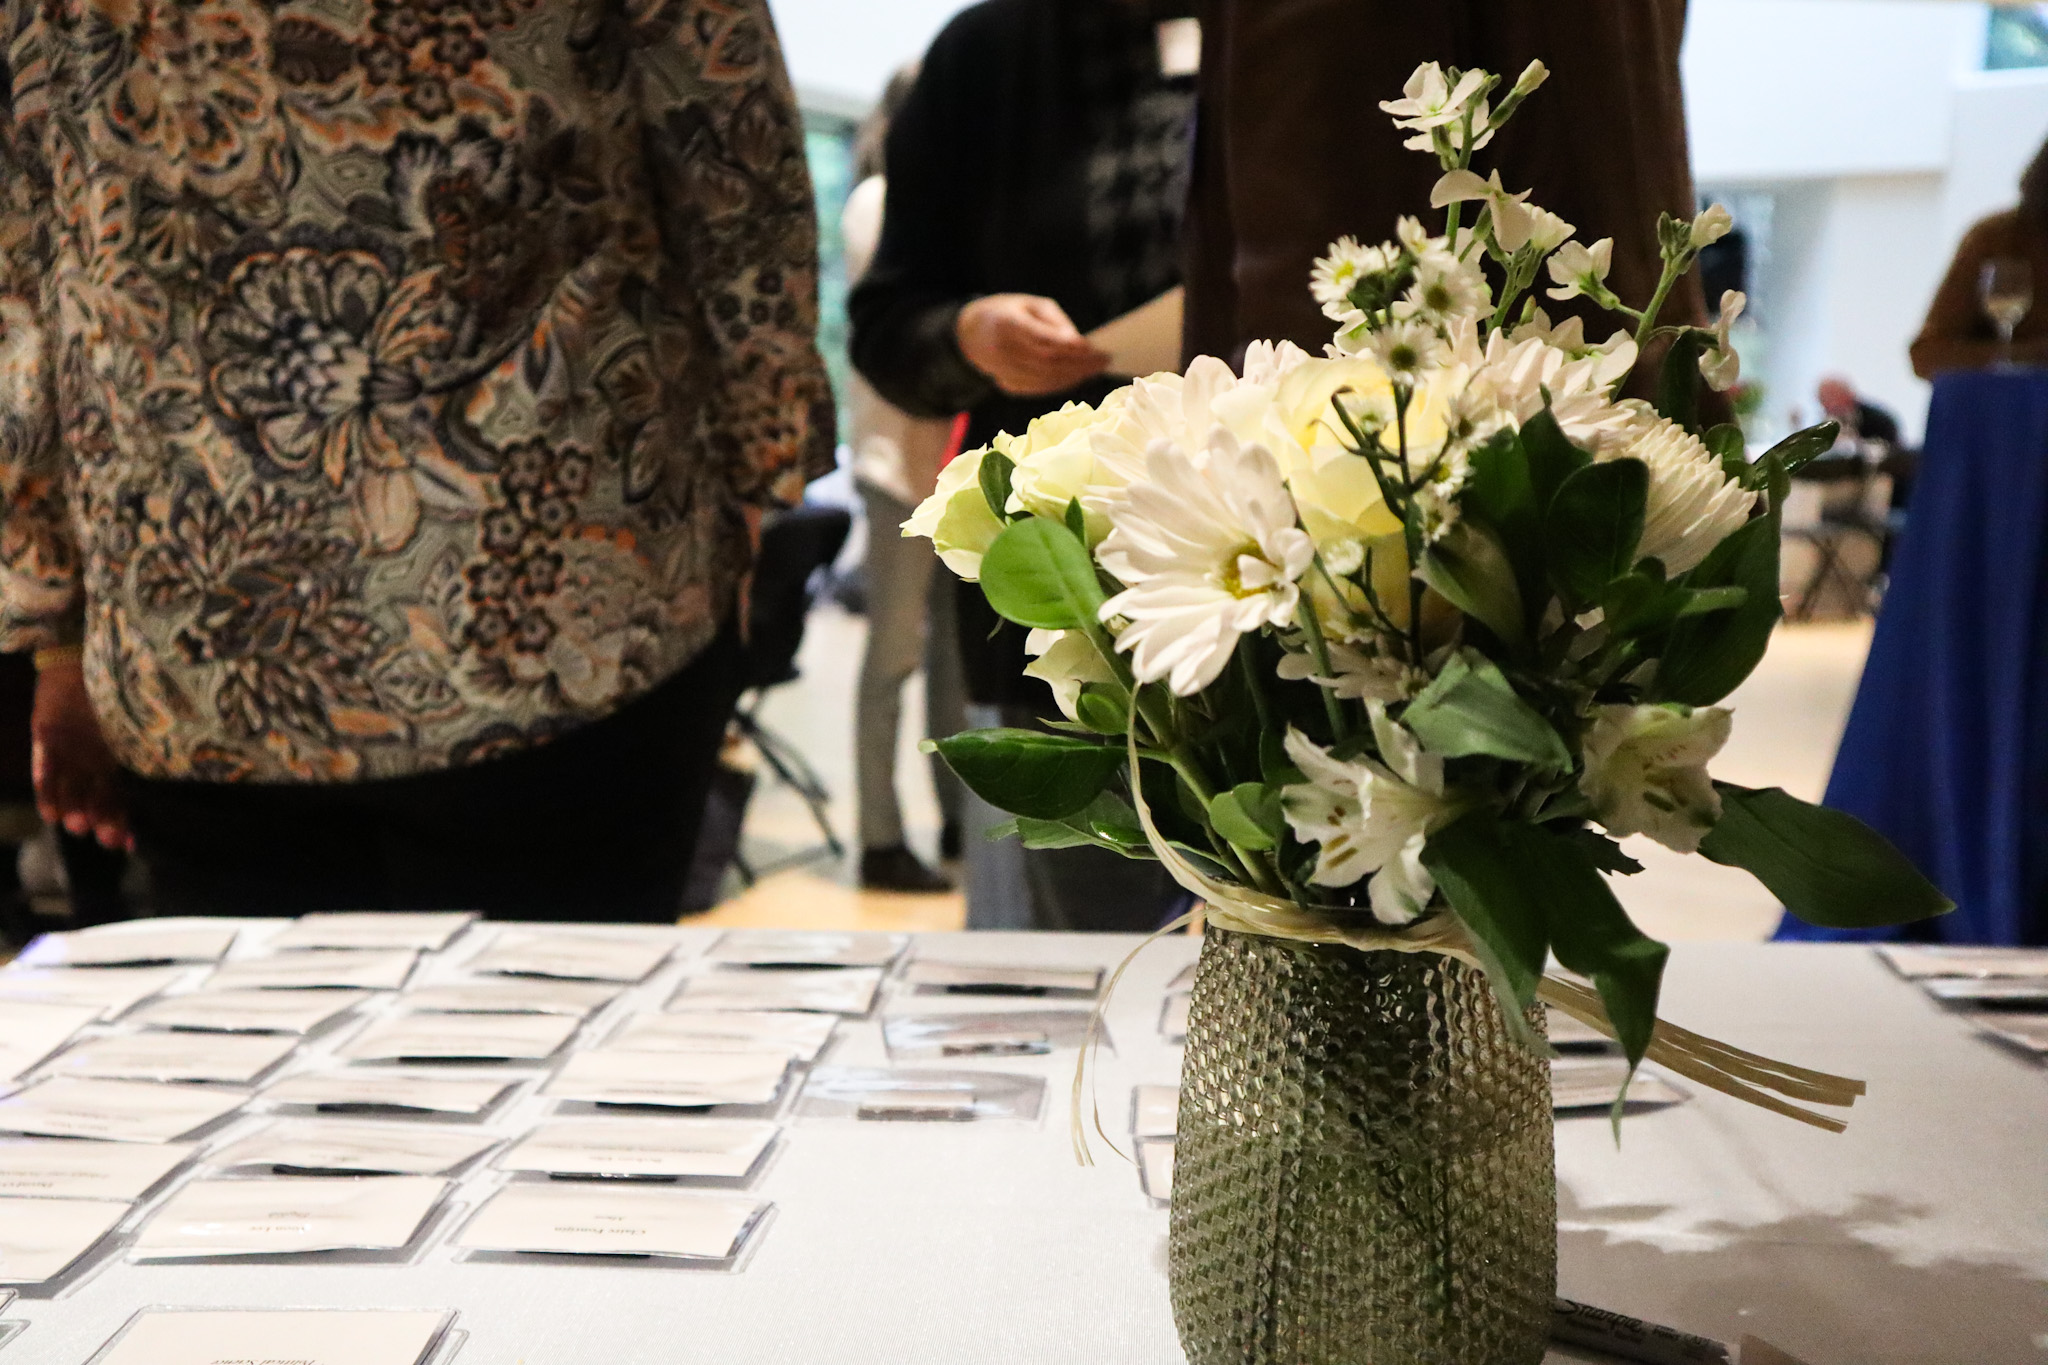 A table with nametags and a white bouquet of flowers in a vase. Employees are gathered in the background. 